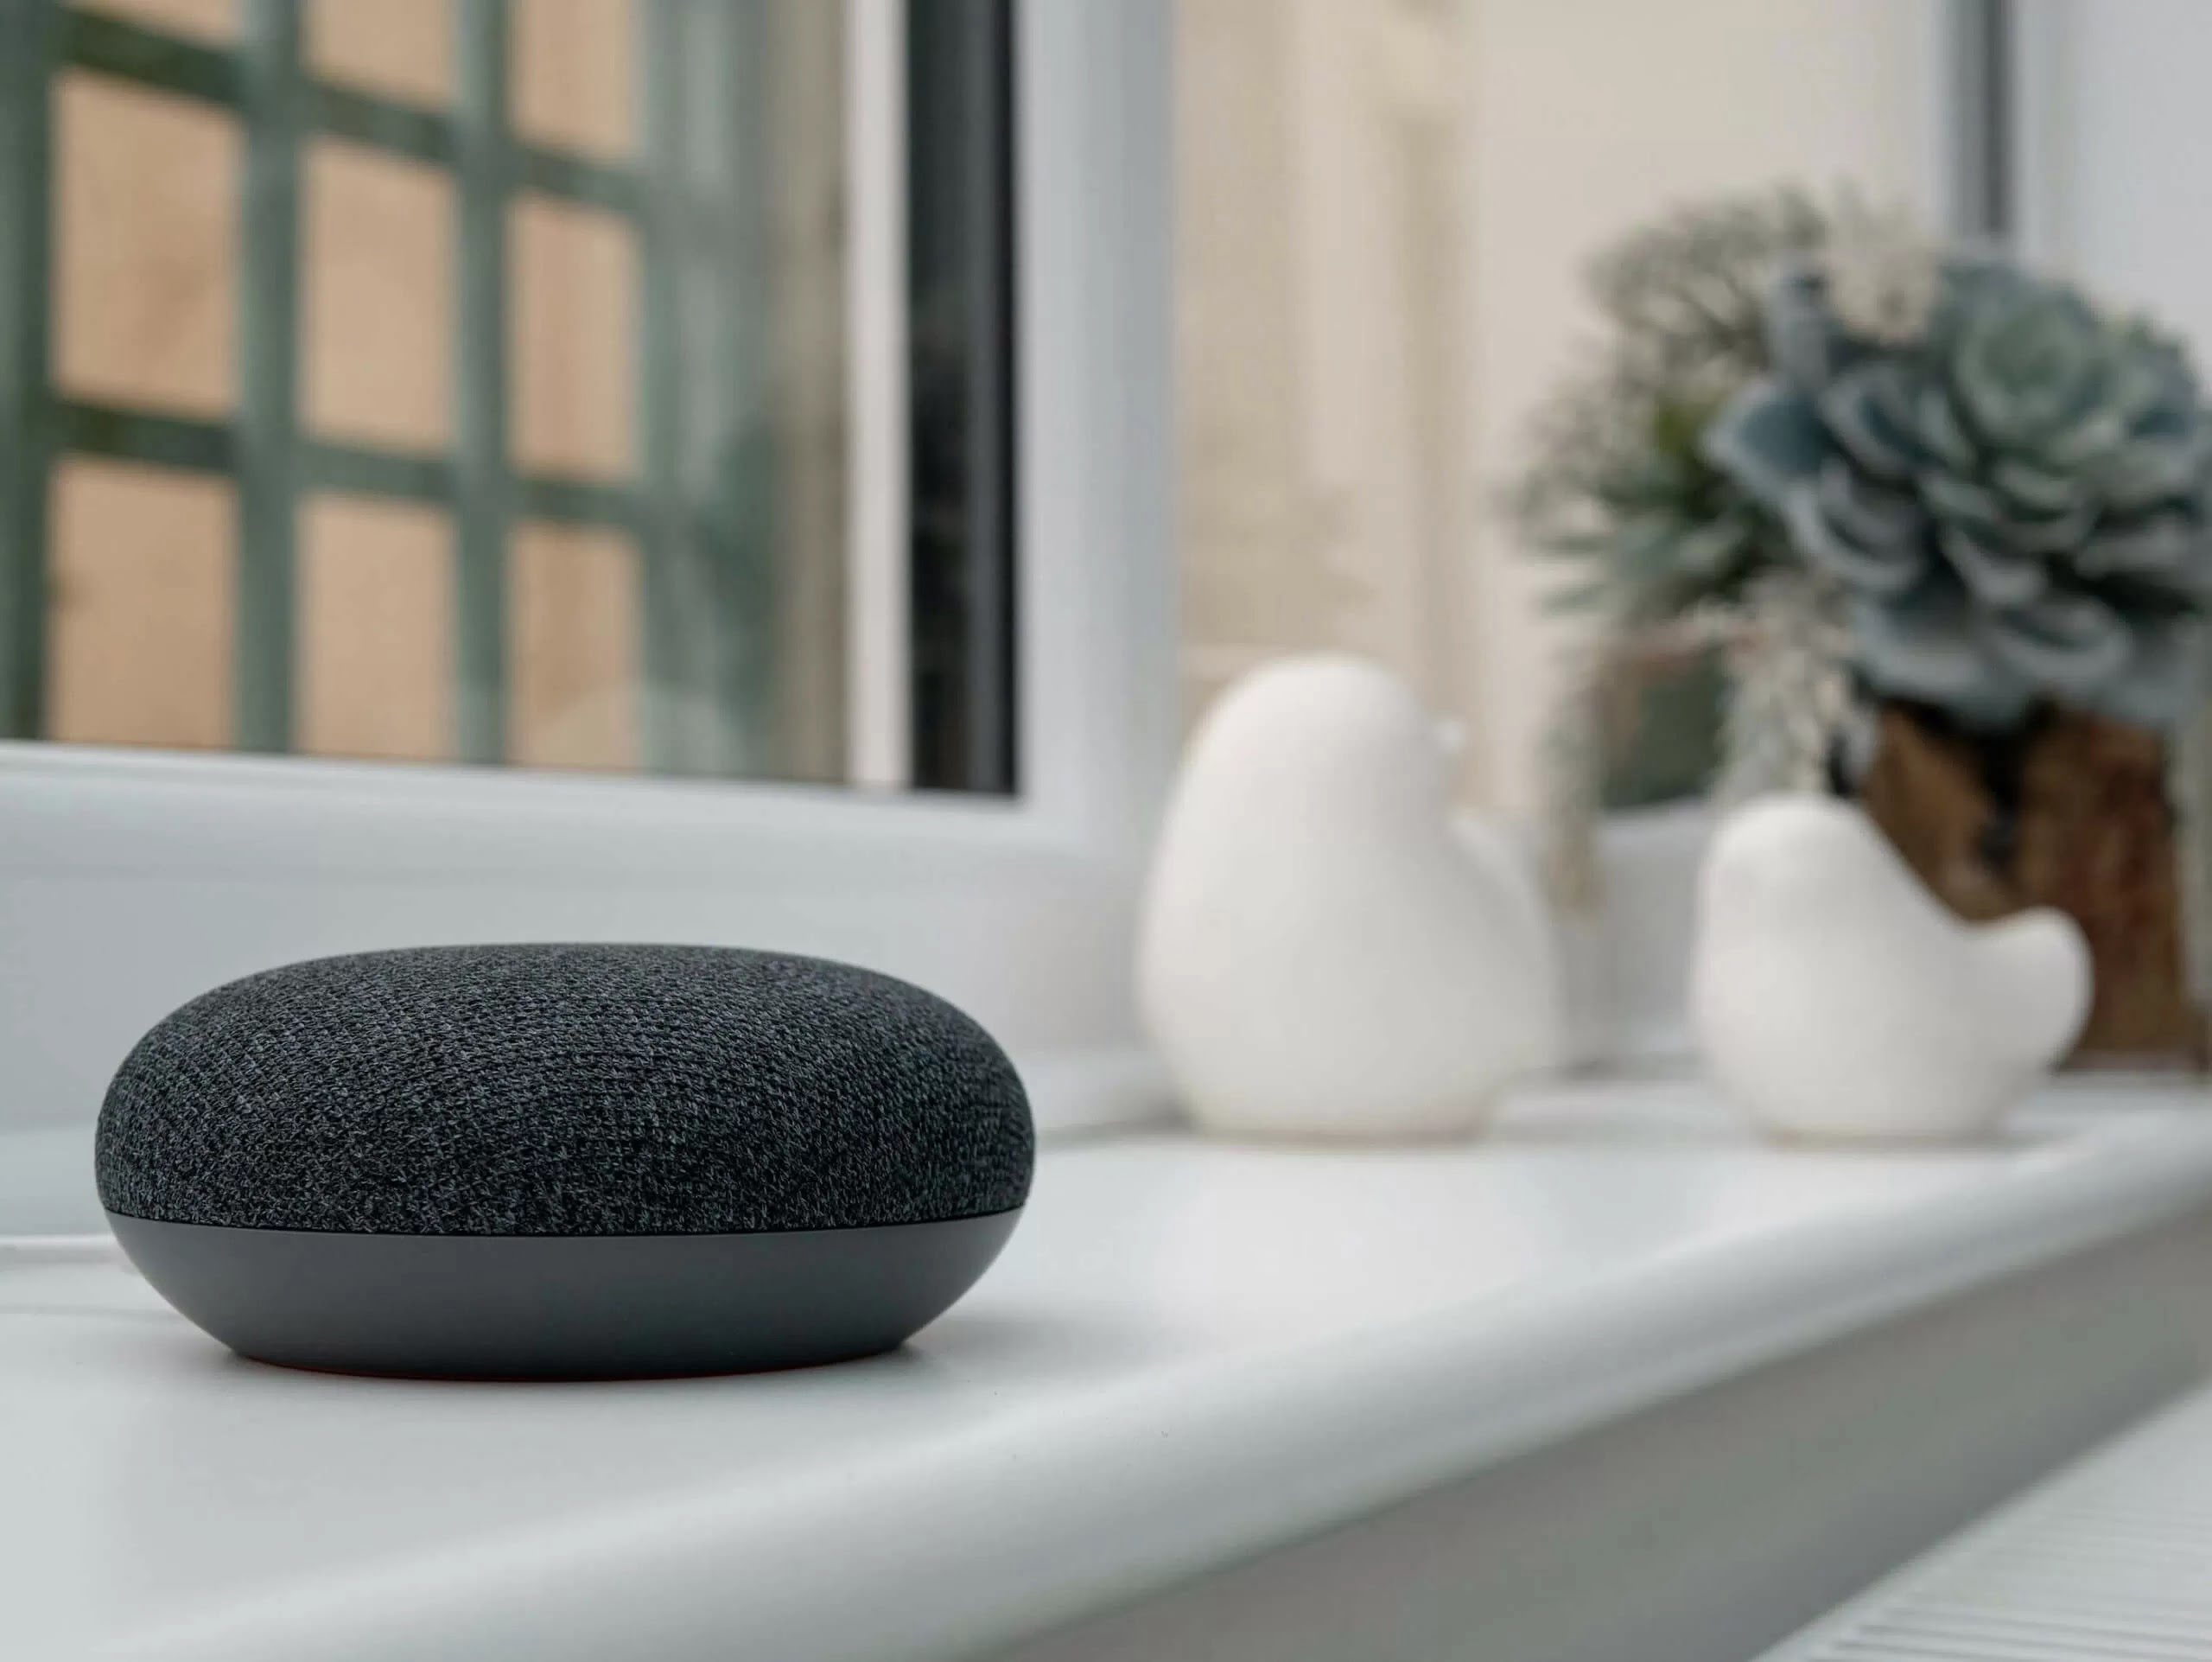 How To Upgrade Google Home Firmware